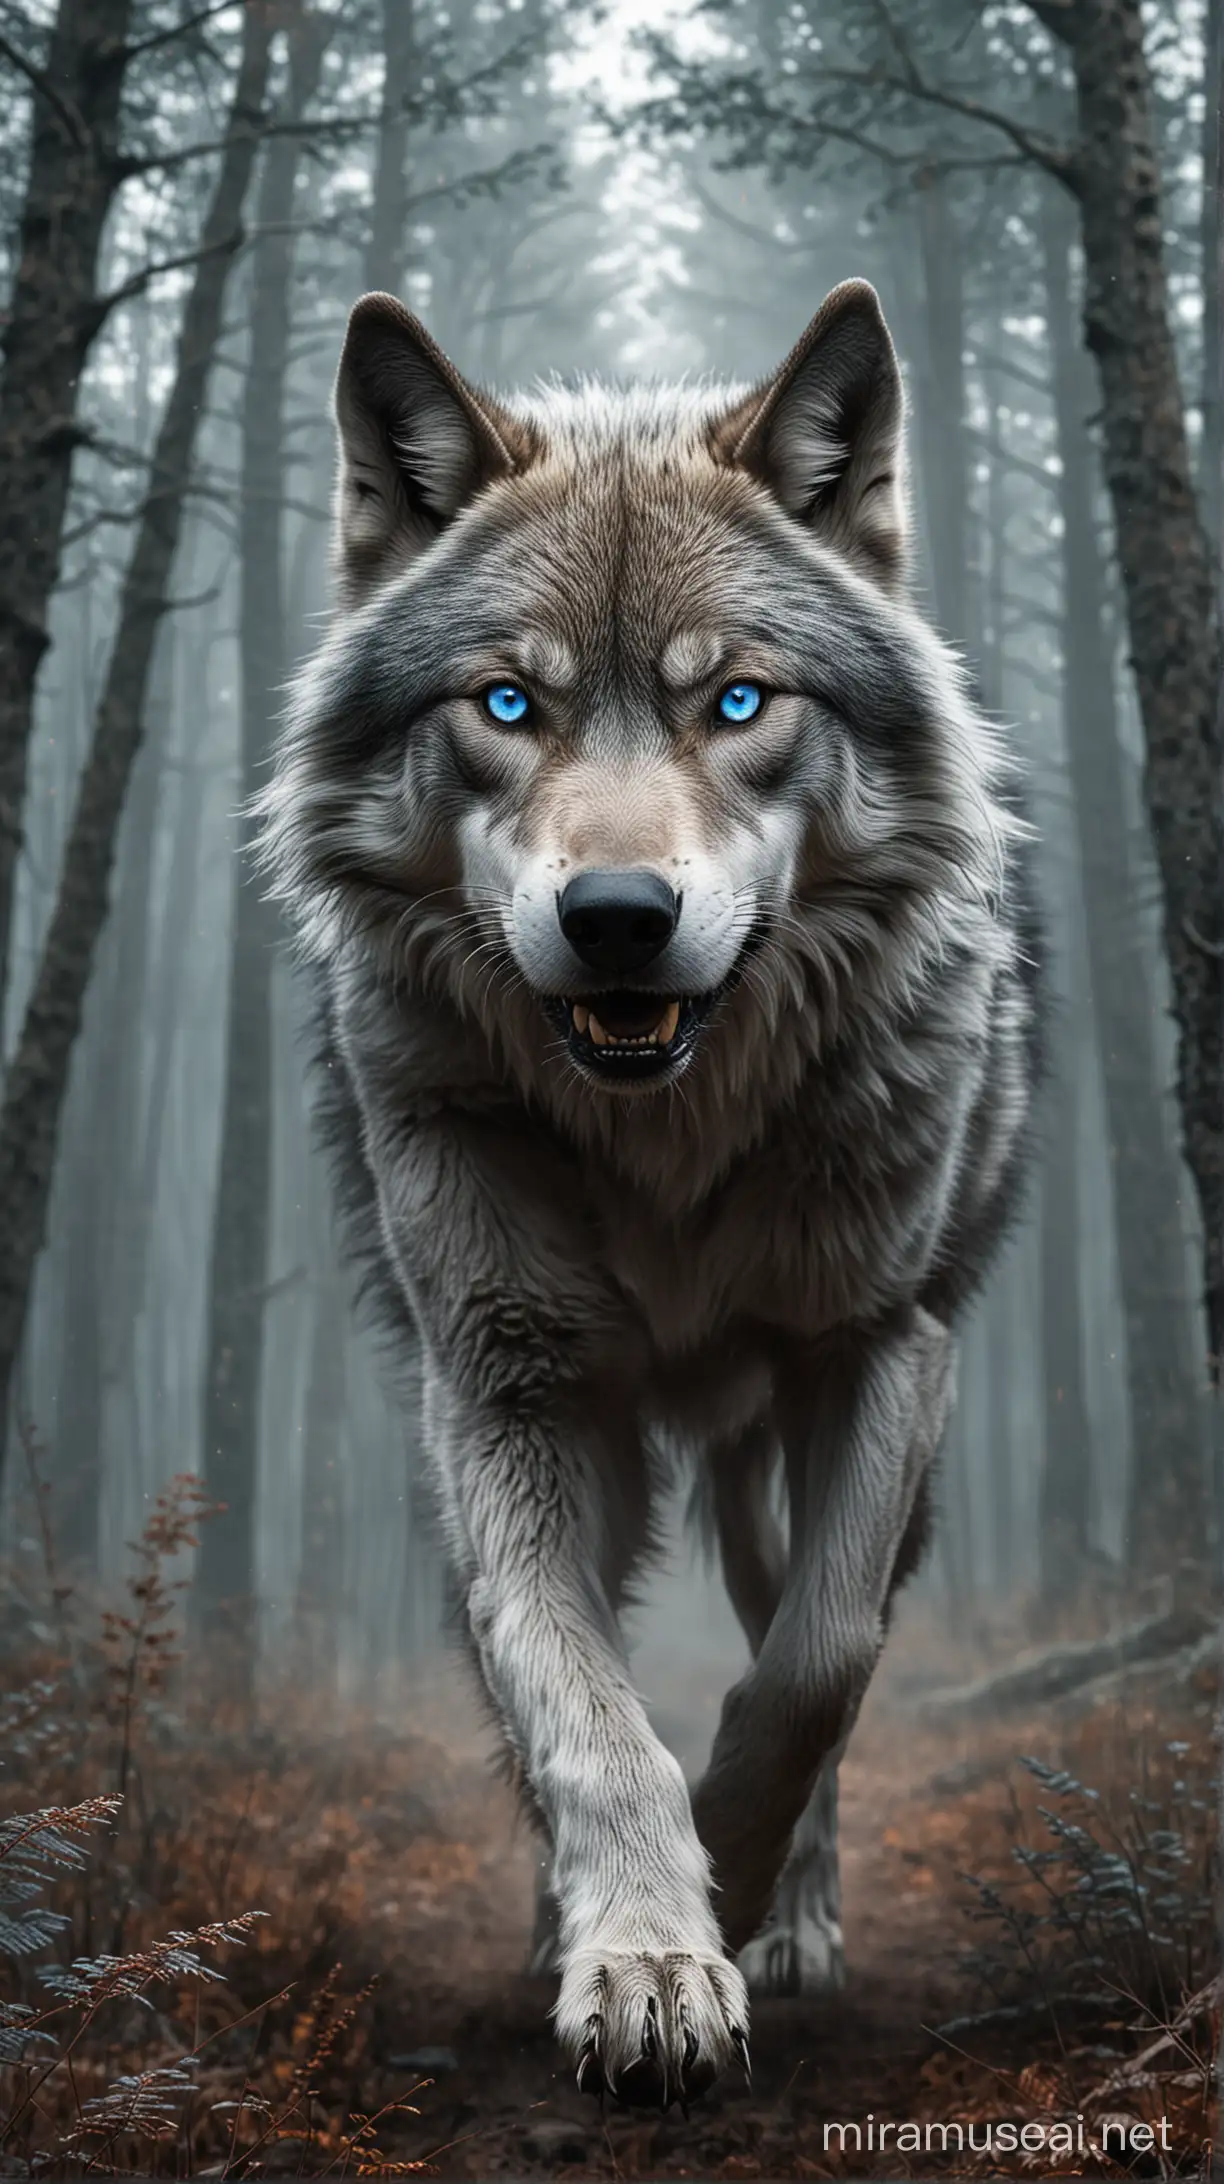 Majestic Grey Wolf with Piercing Blue Eyes Emerging from Forest